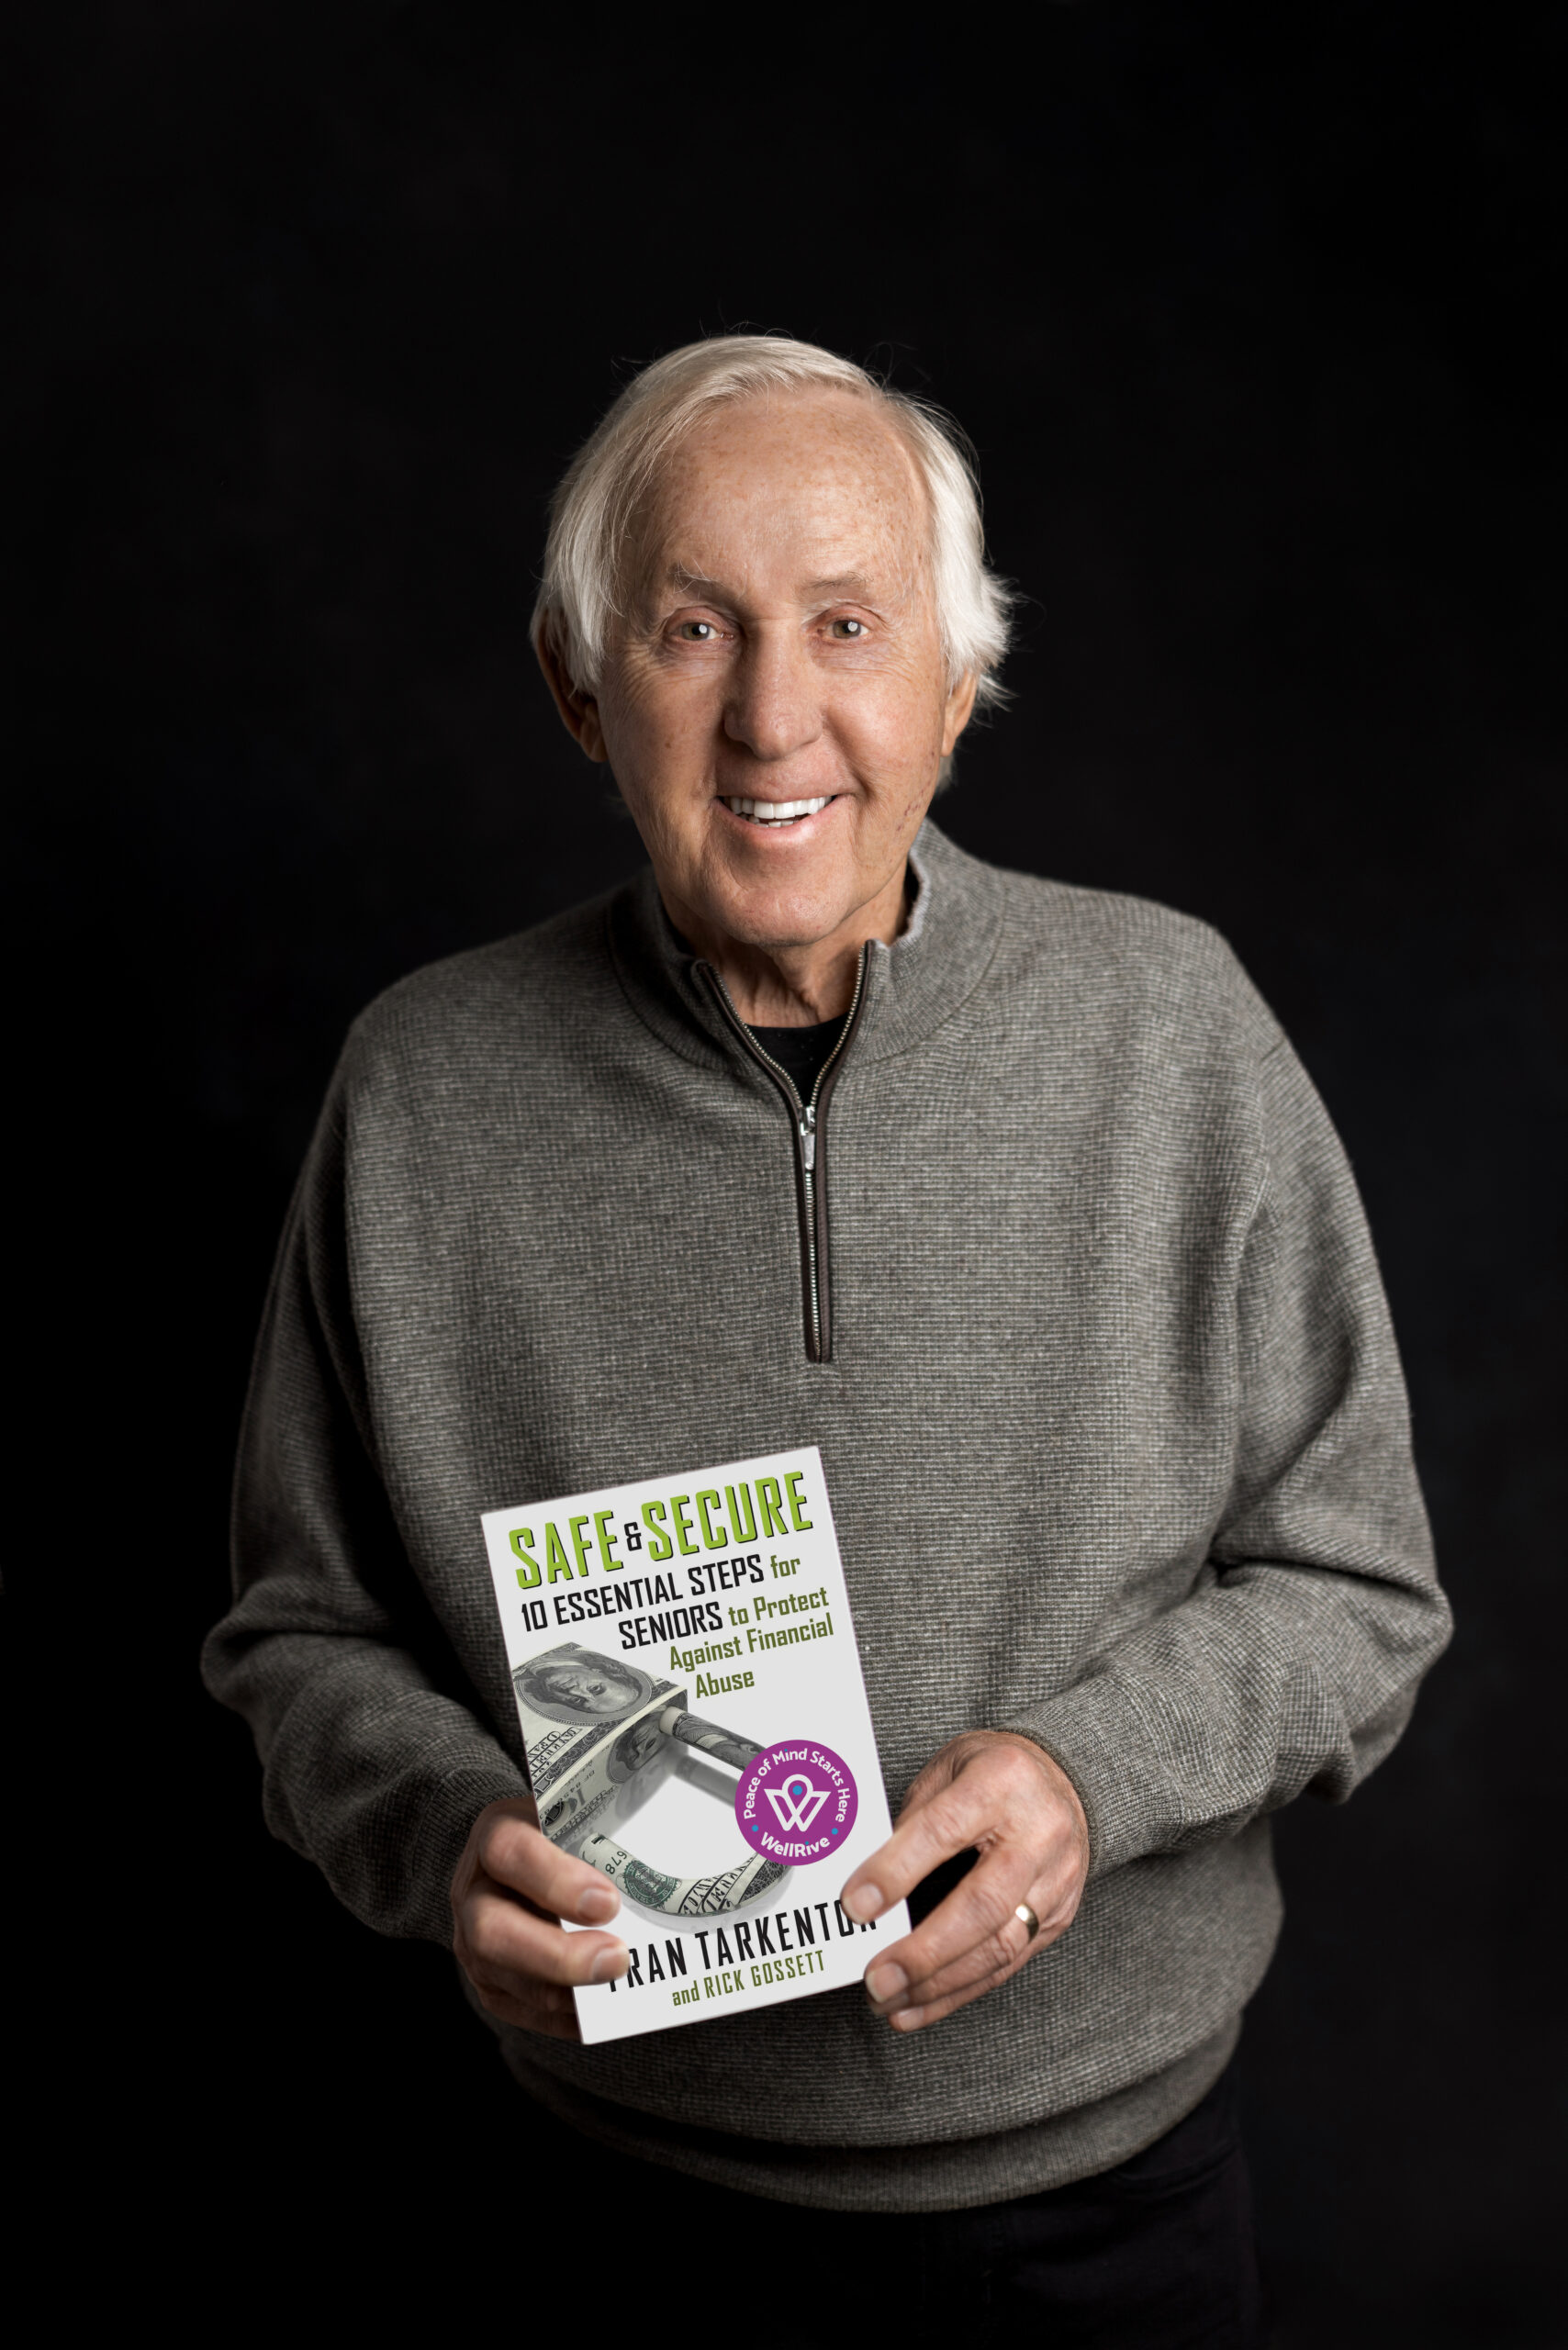 Fran Tarkenton with his book safe and secure